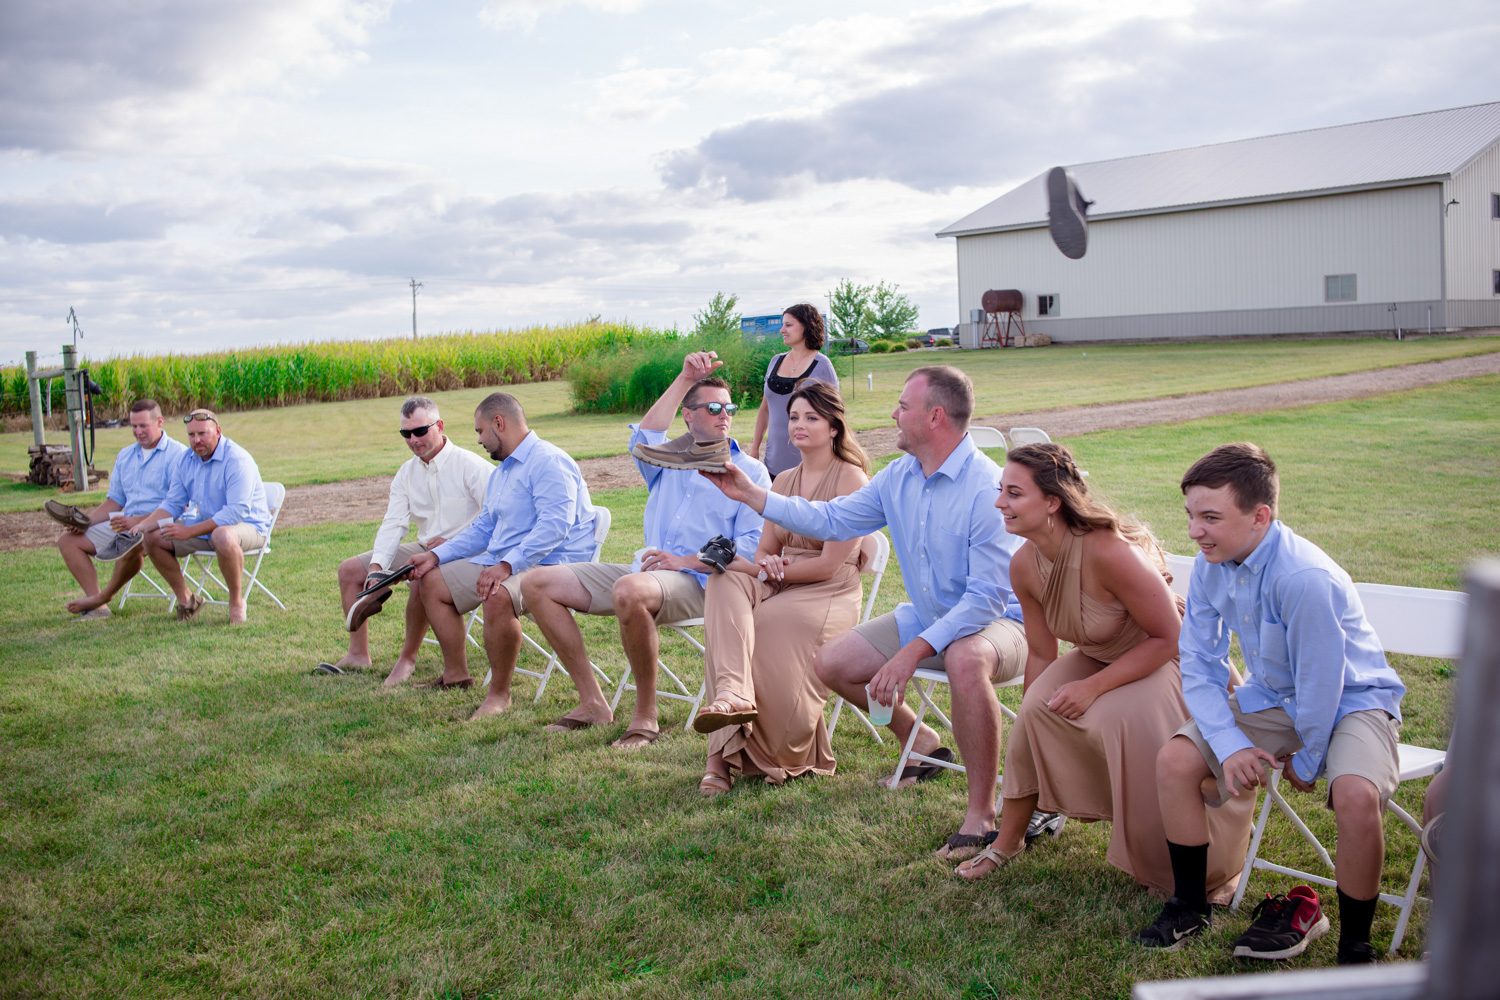 reception games with bridal party